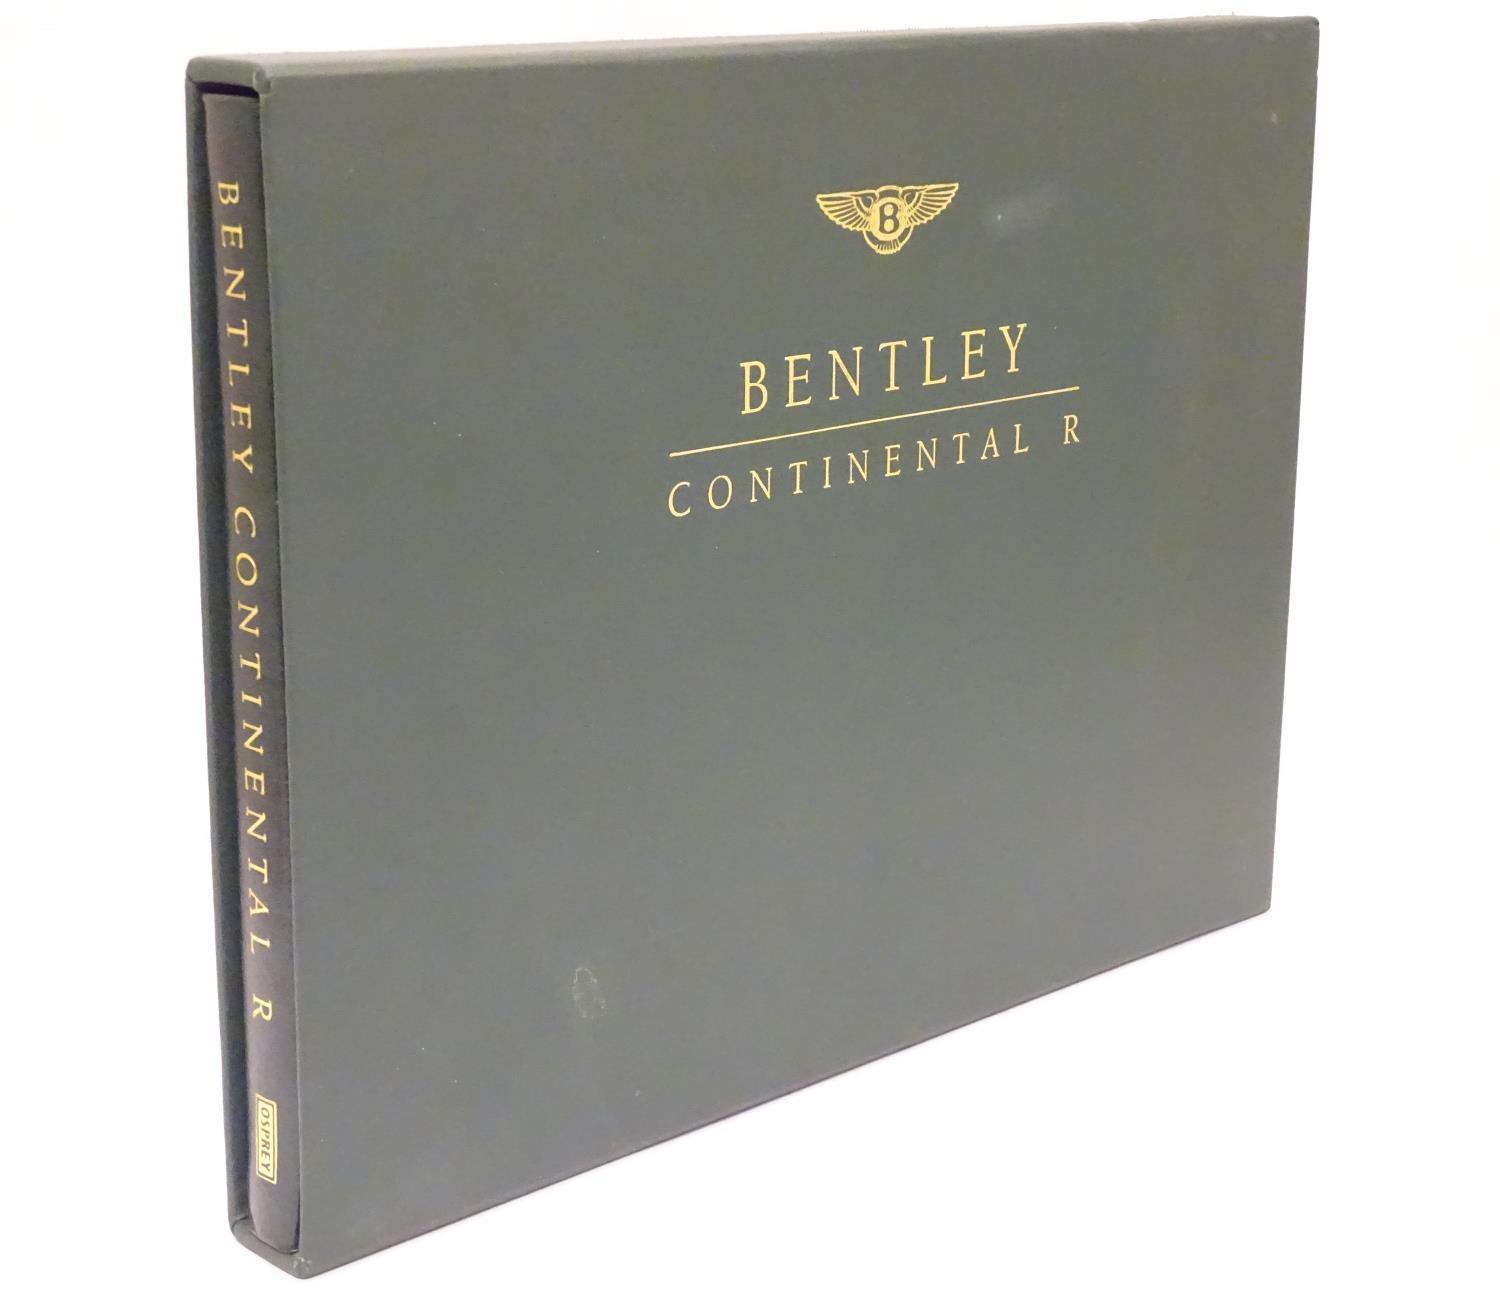 Book : Bentley Continental R, by Ian Adcock, pub. Osprey Automotive 1992 First edition, bound in